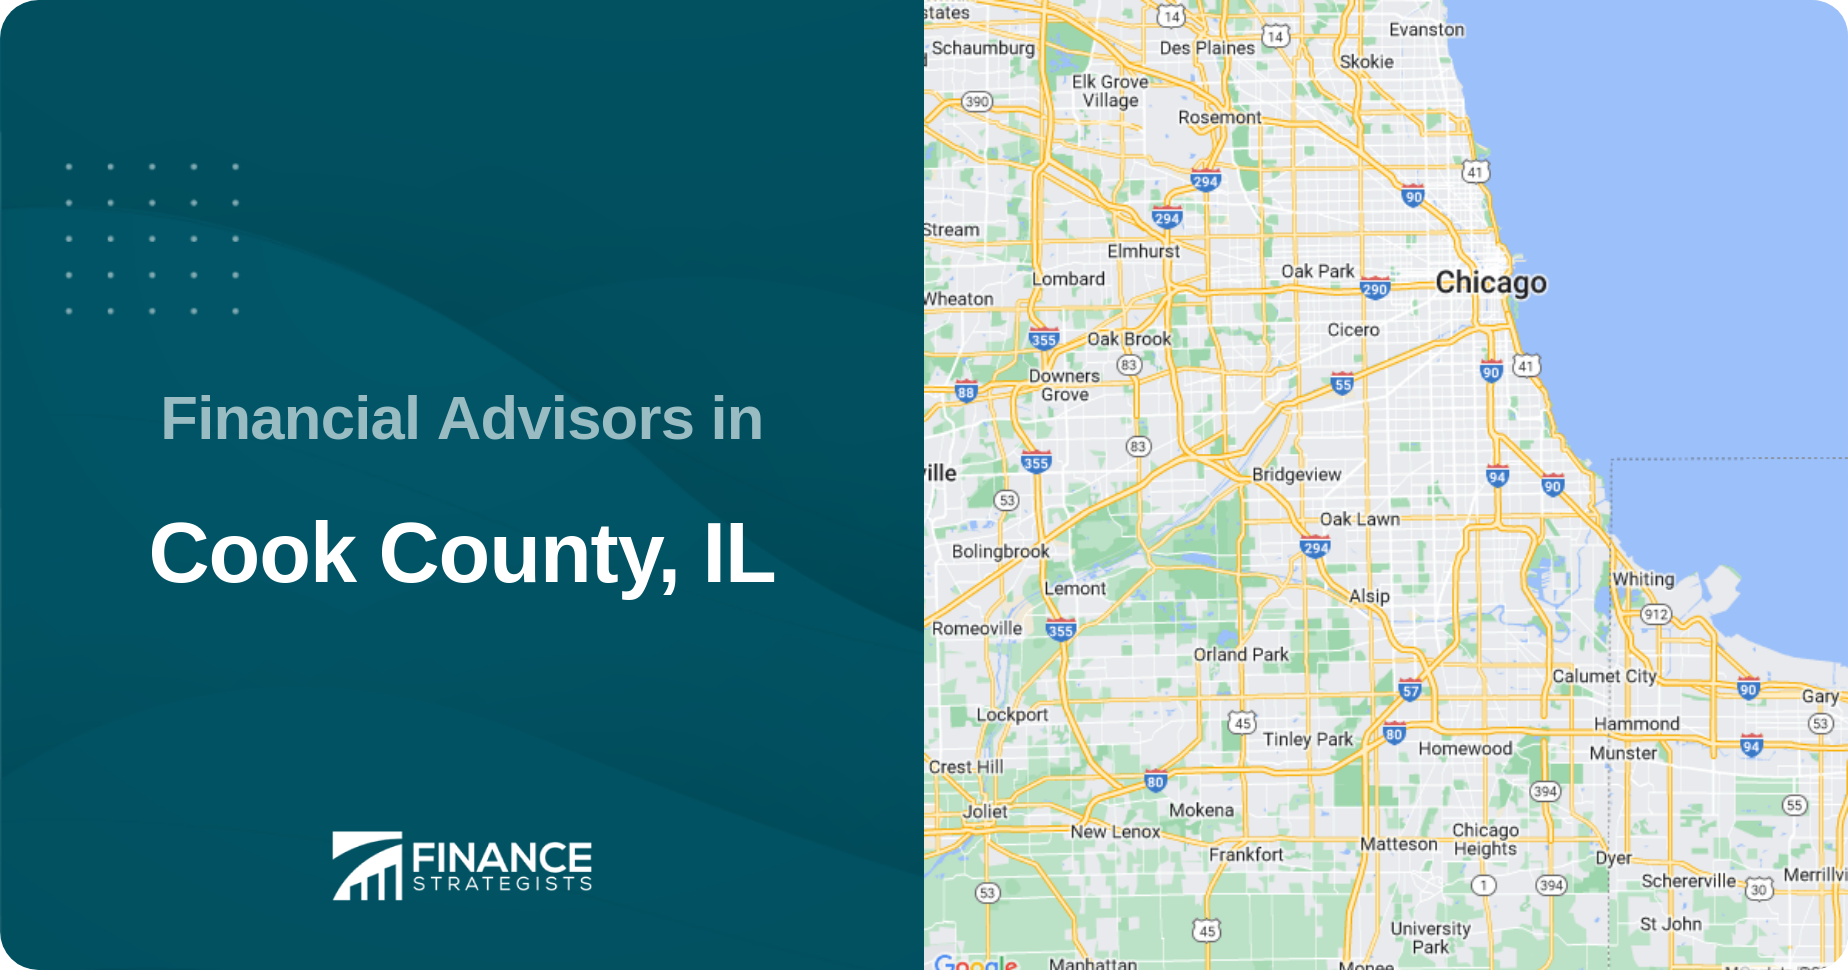 Financial Advisors in Cook County, IL